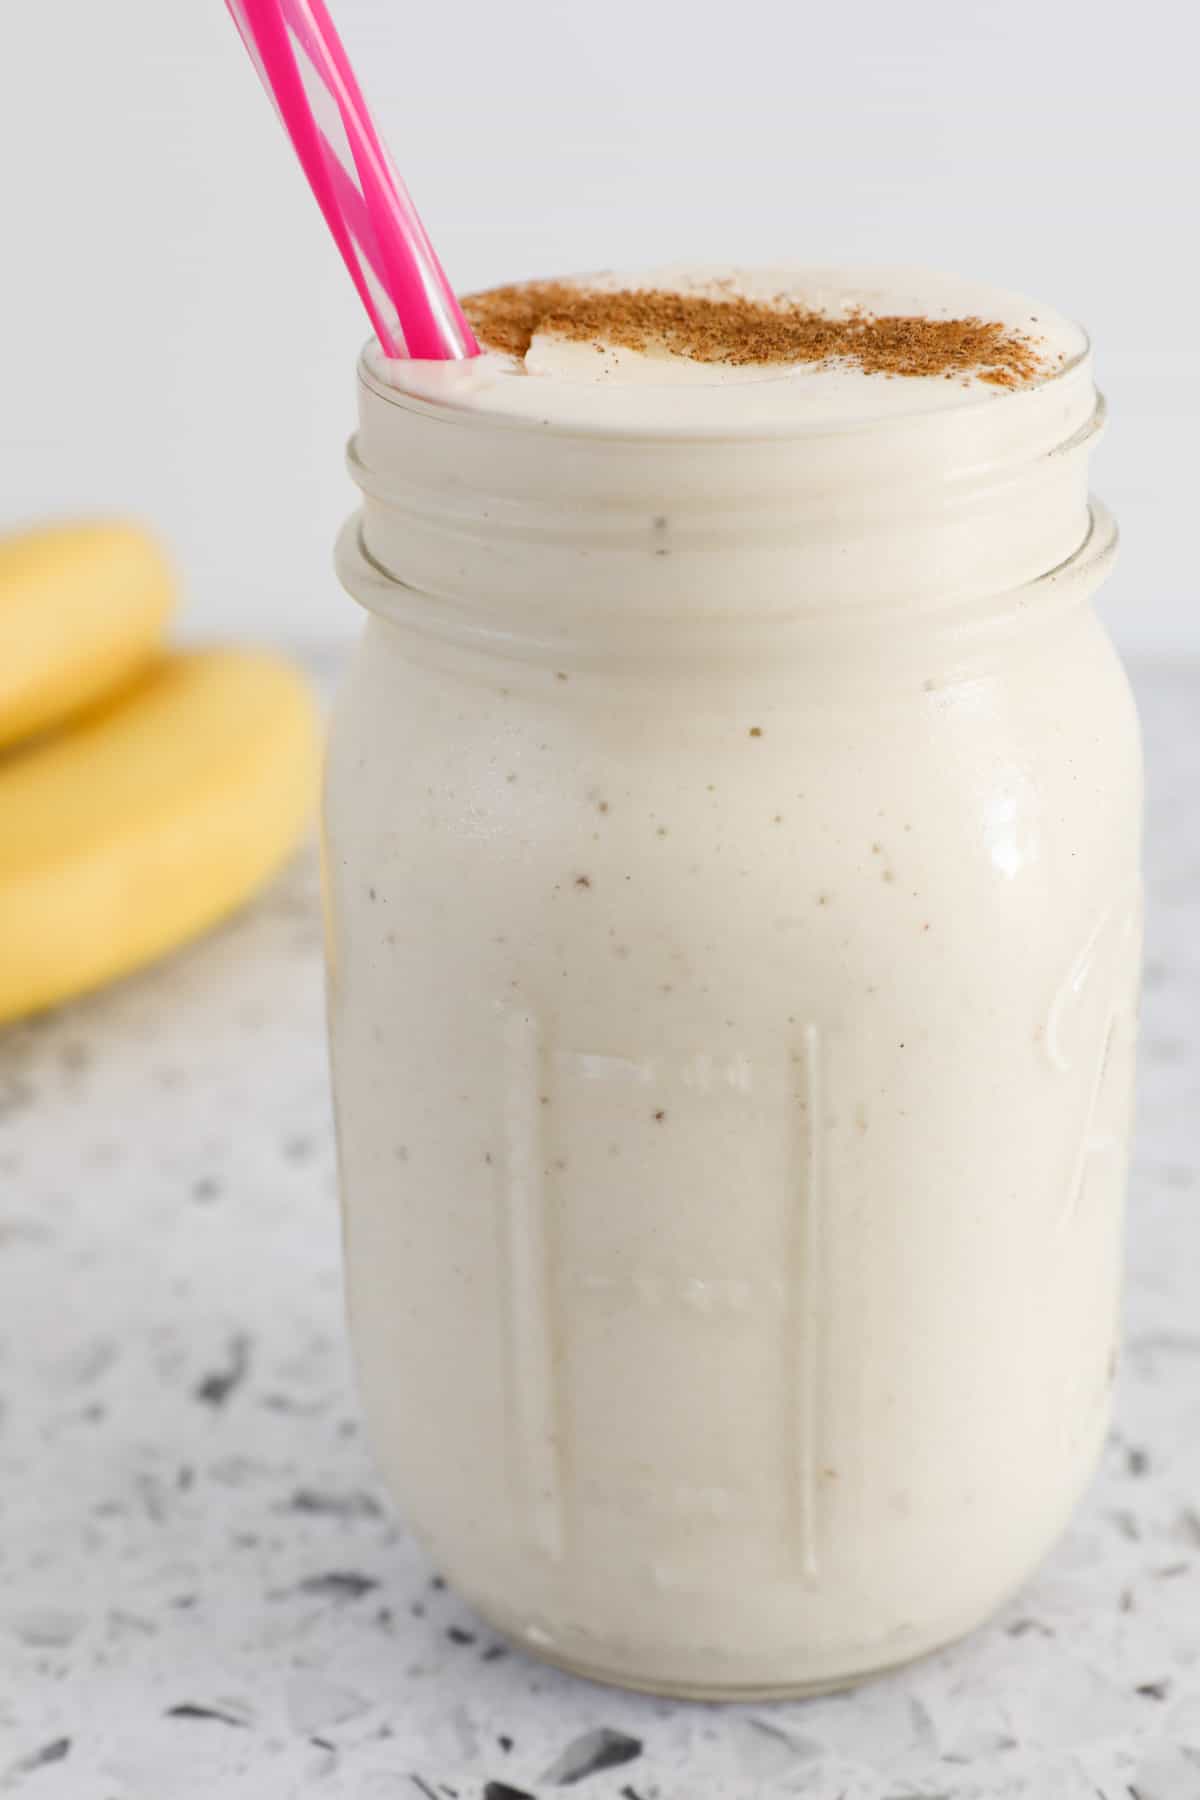 A glass jar filled with a thick and creamy banana milkshake.